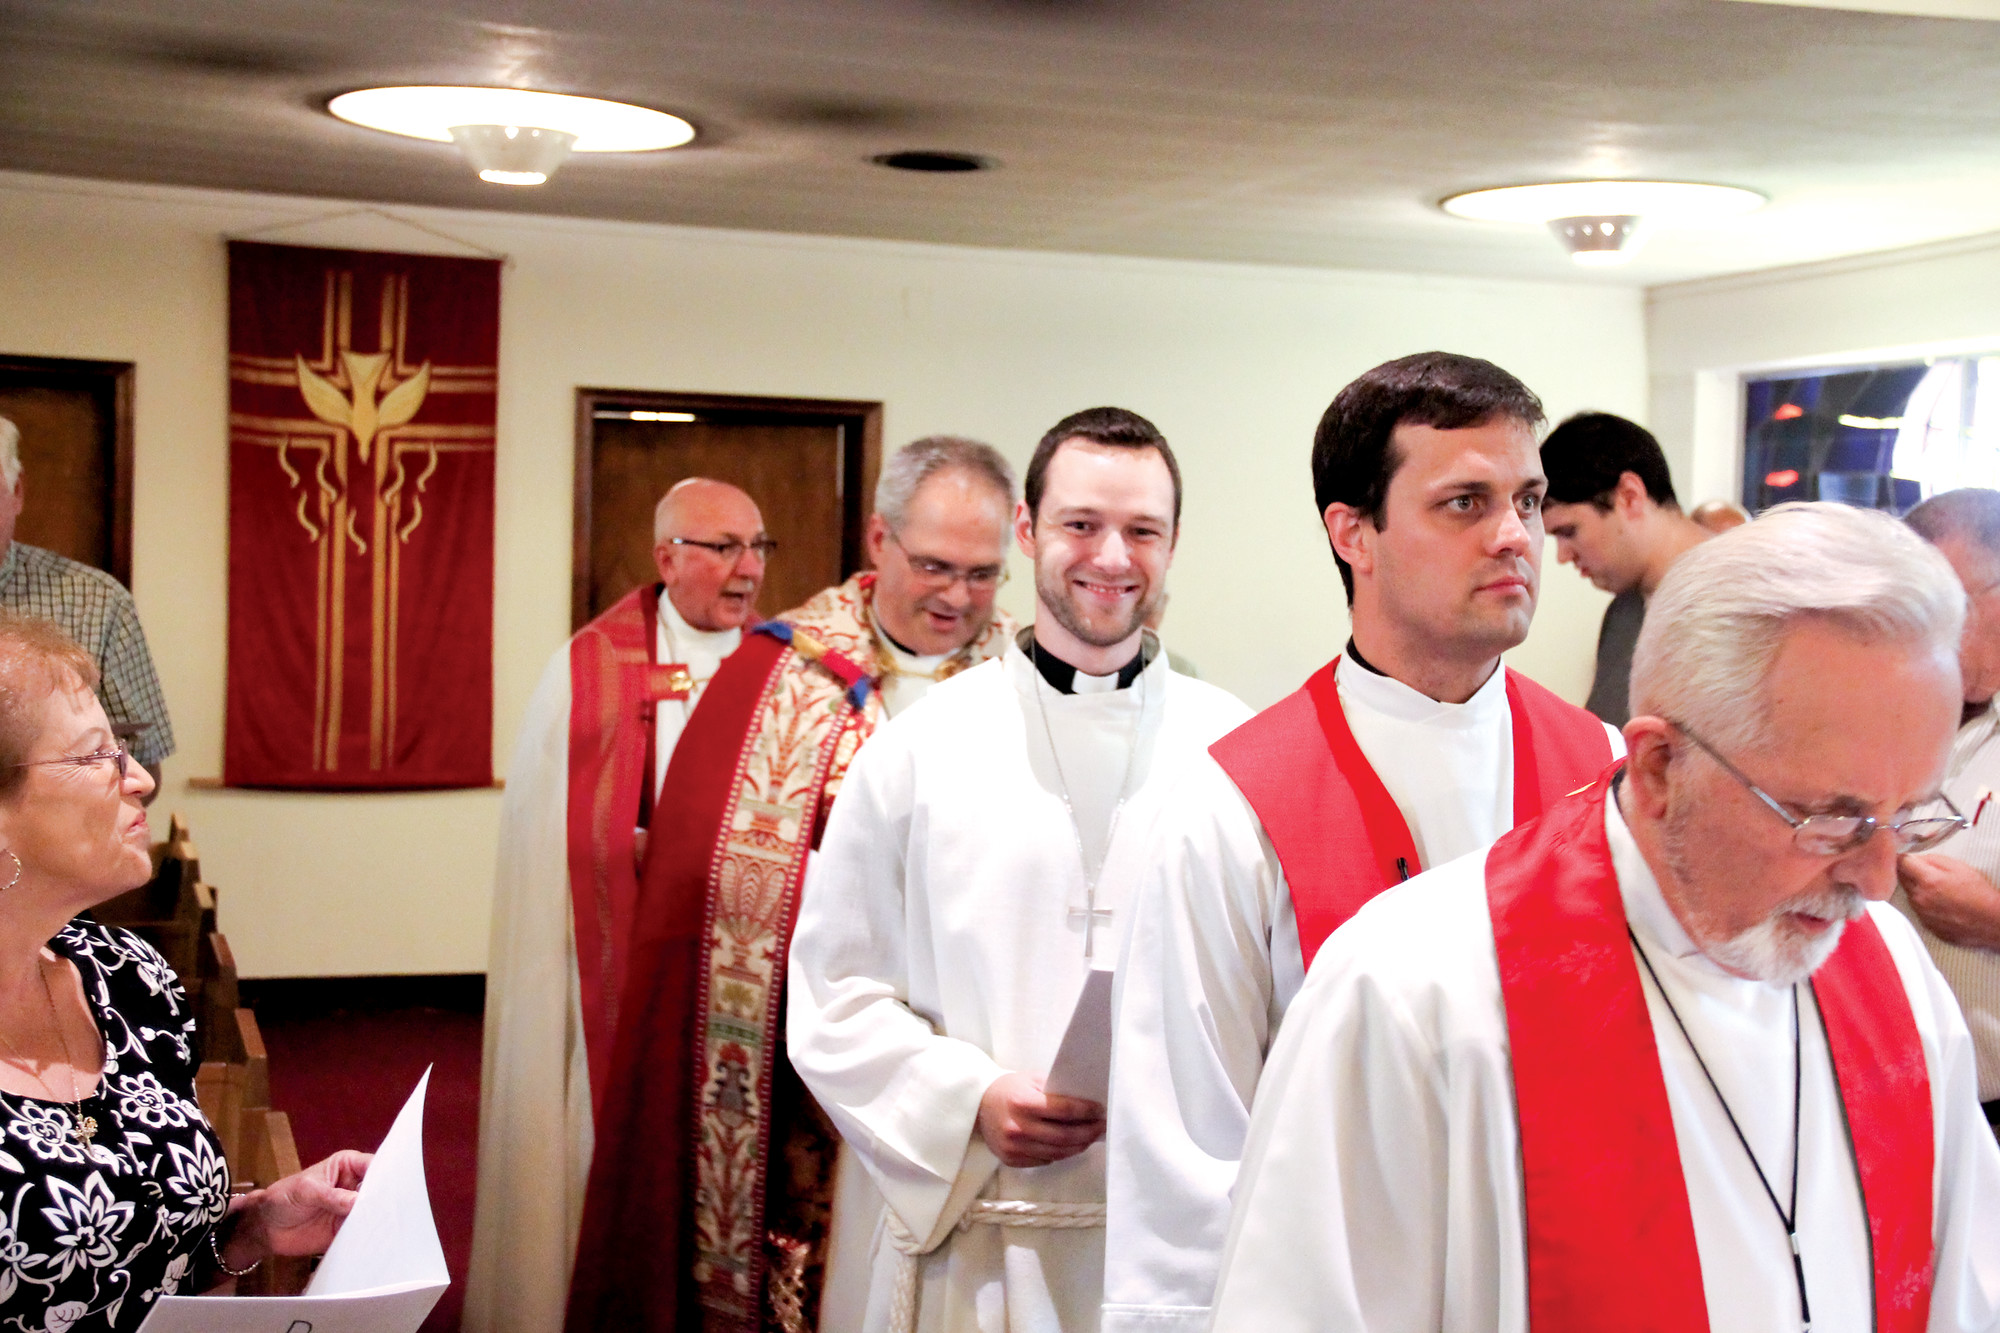 Budenholzer was ordained and installed at a ceremony at Calvary Lutheran Church last Sunday.